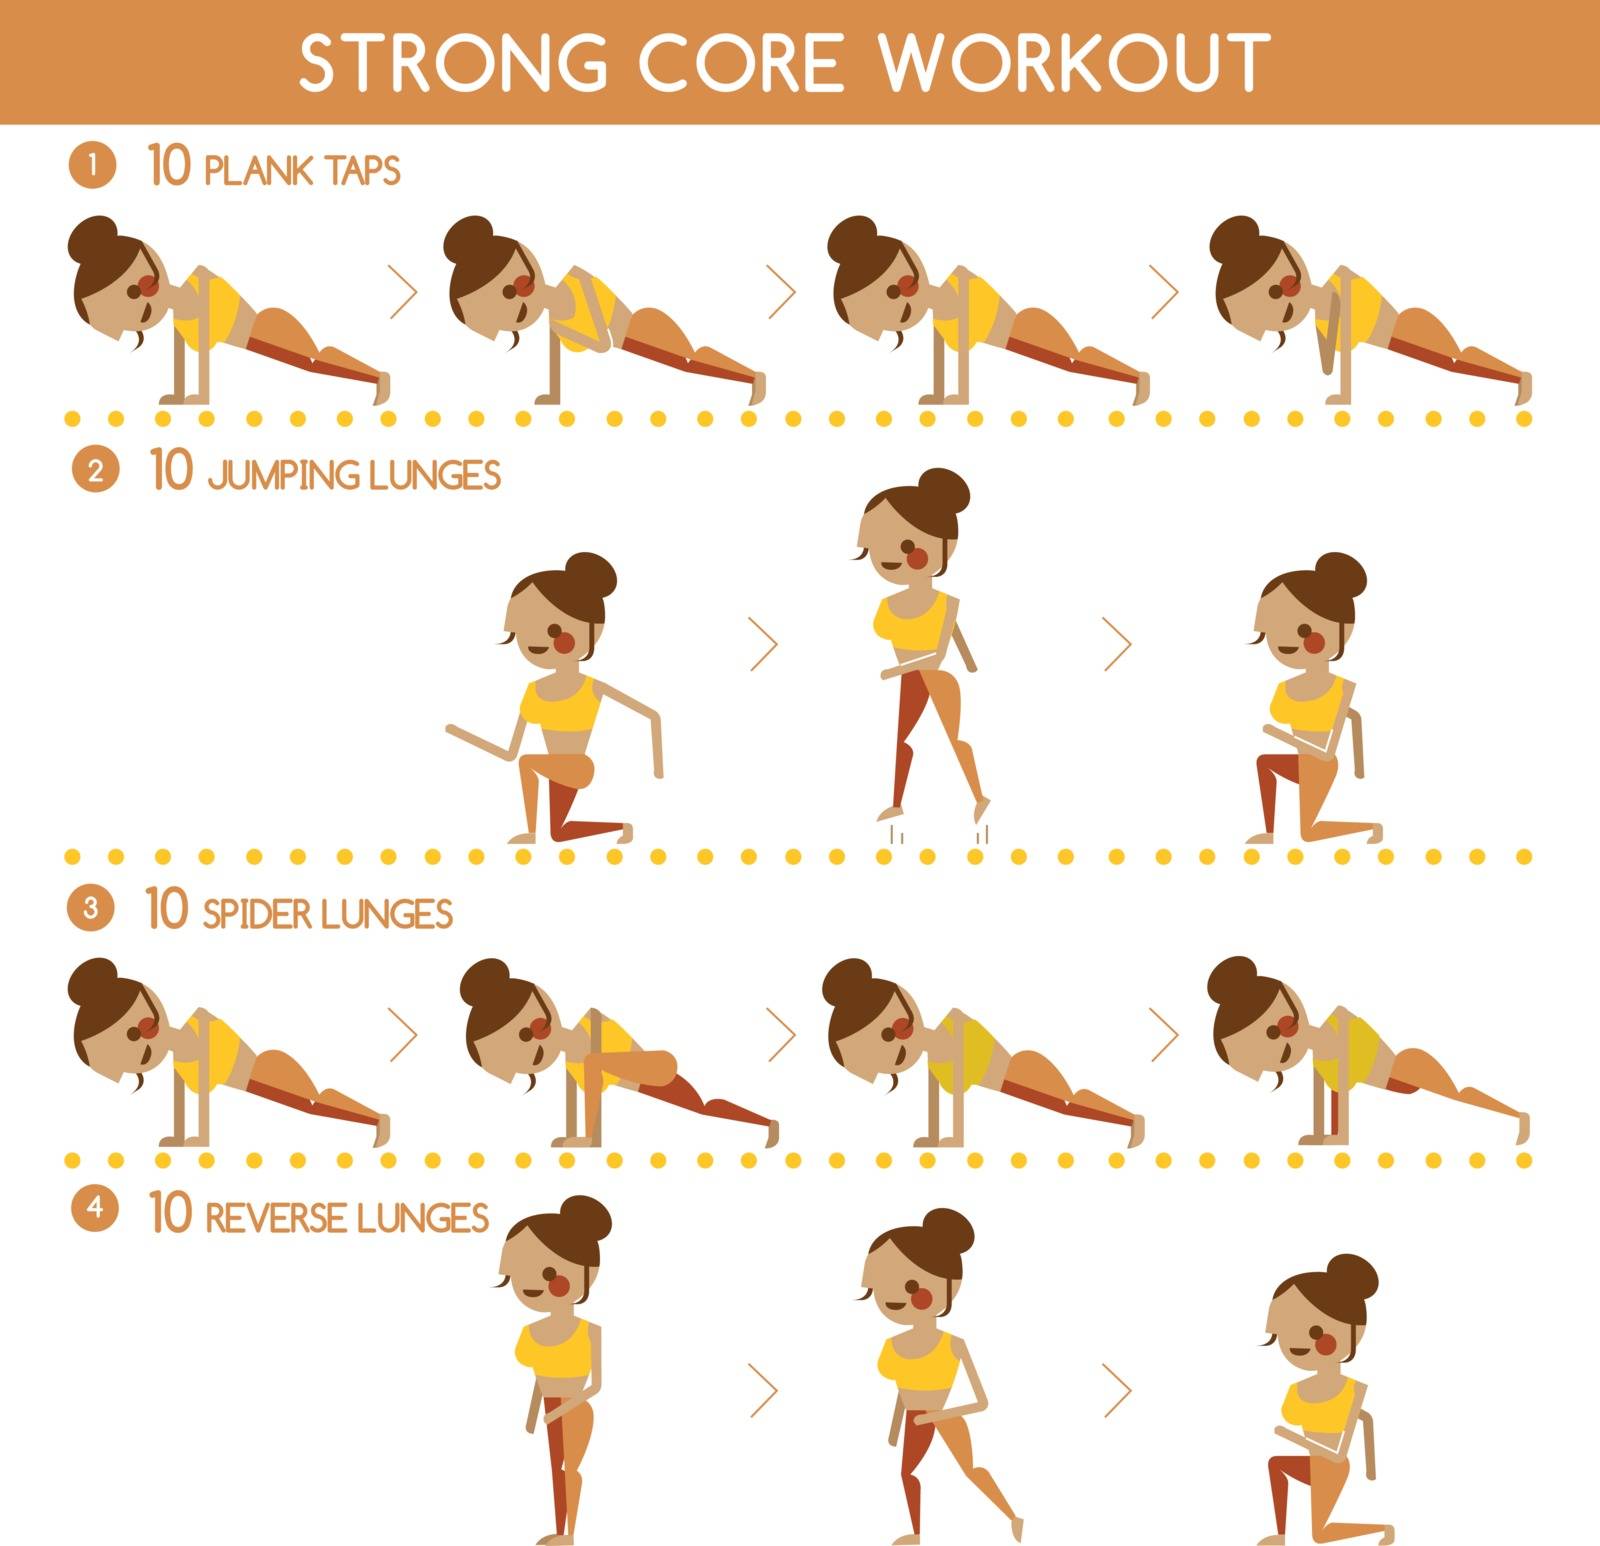 Strong core workout by kninwong